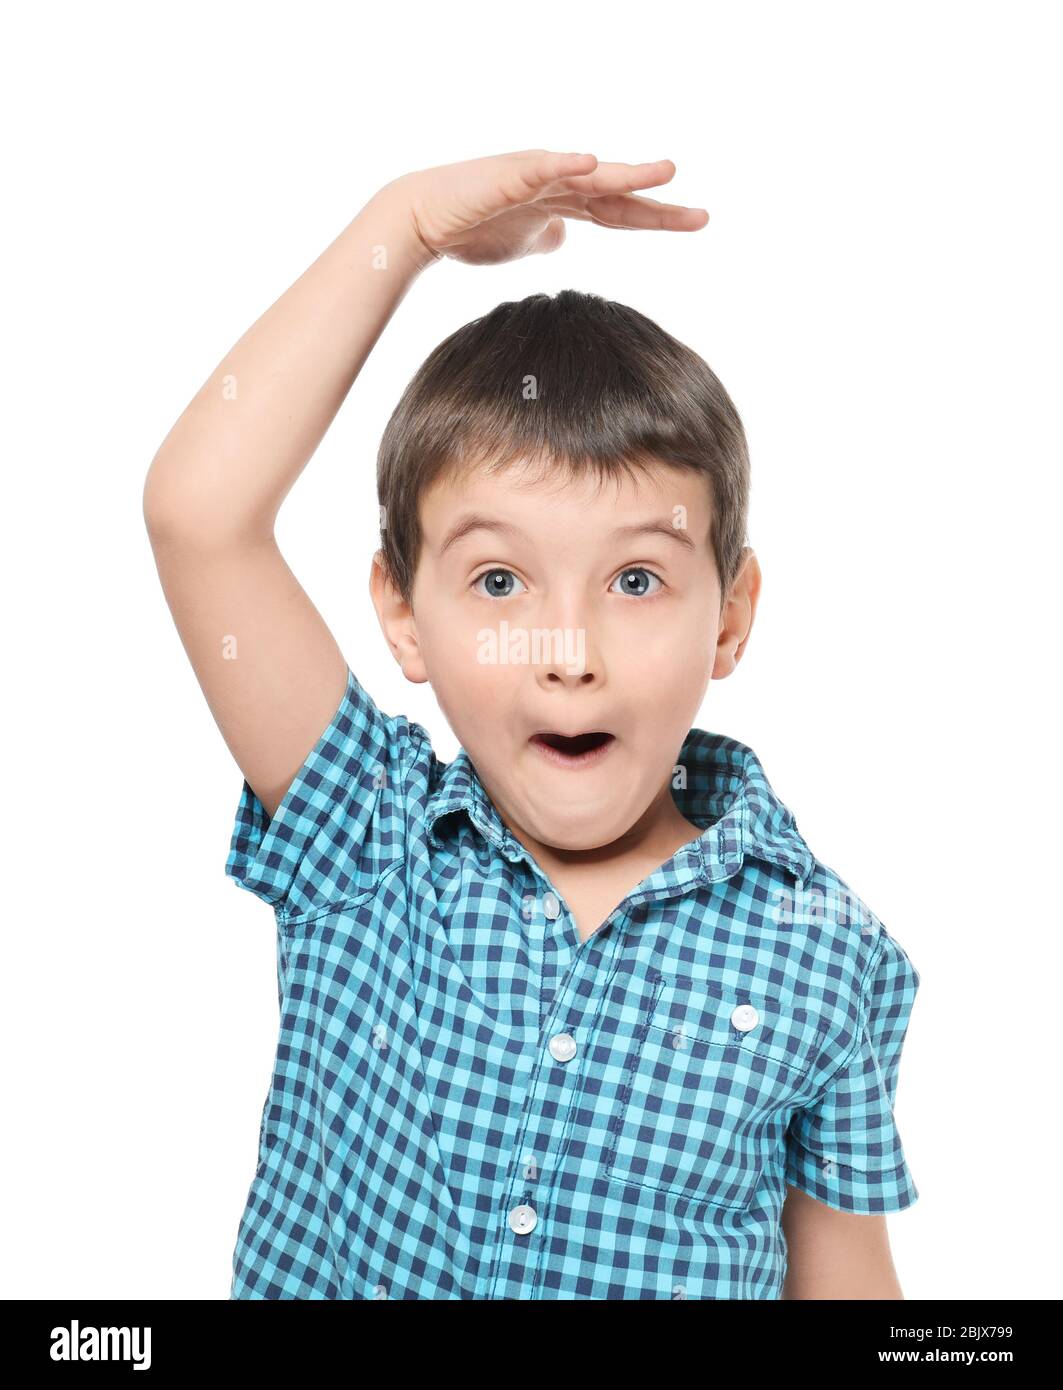 Little boy measuring height on white background Stock Photo